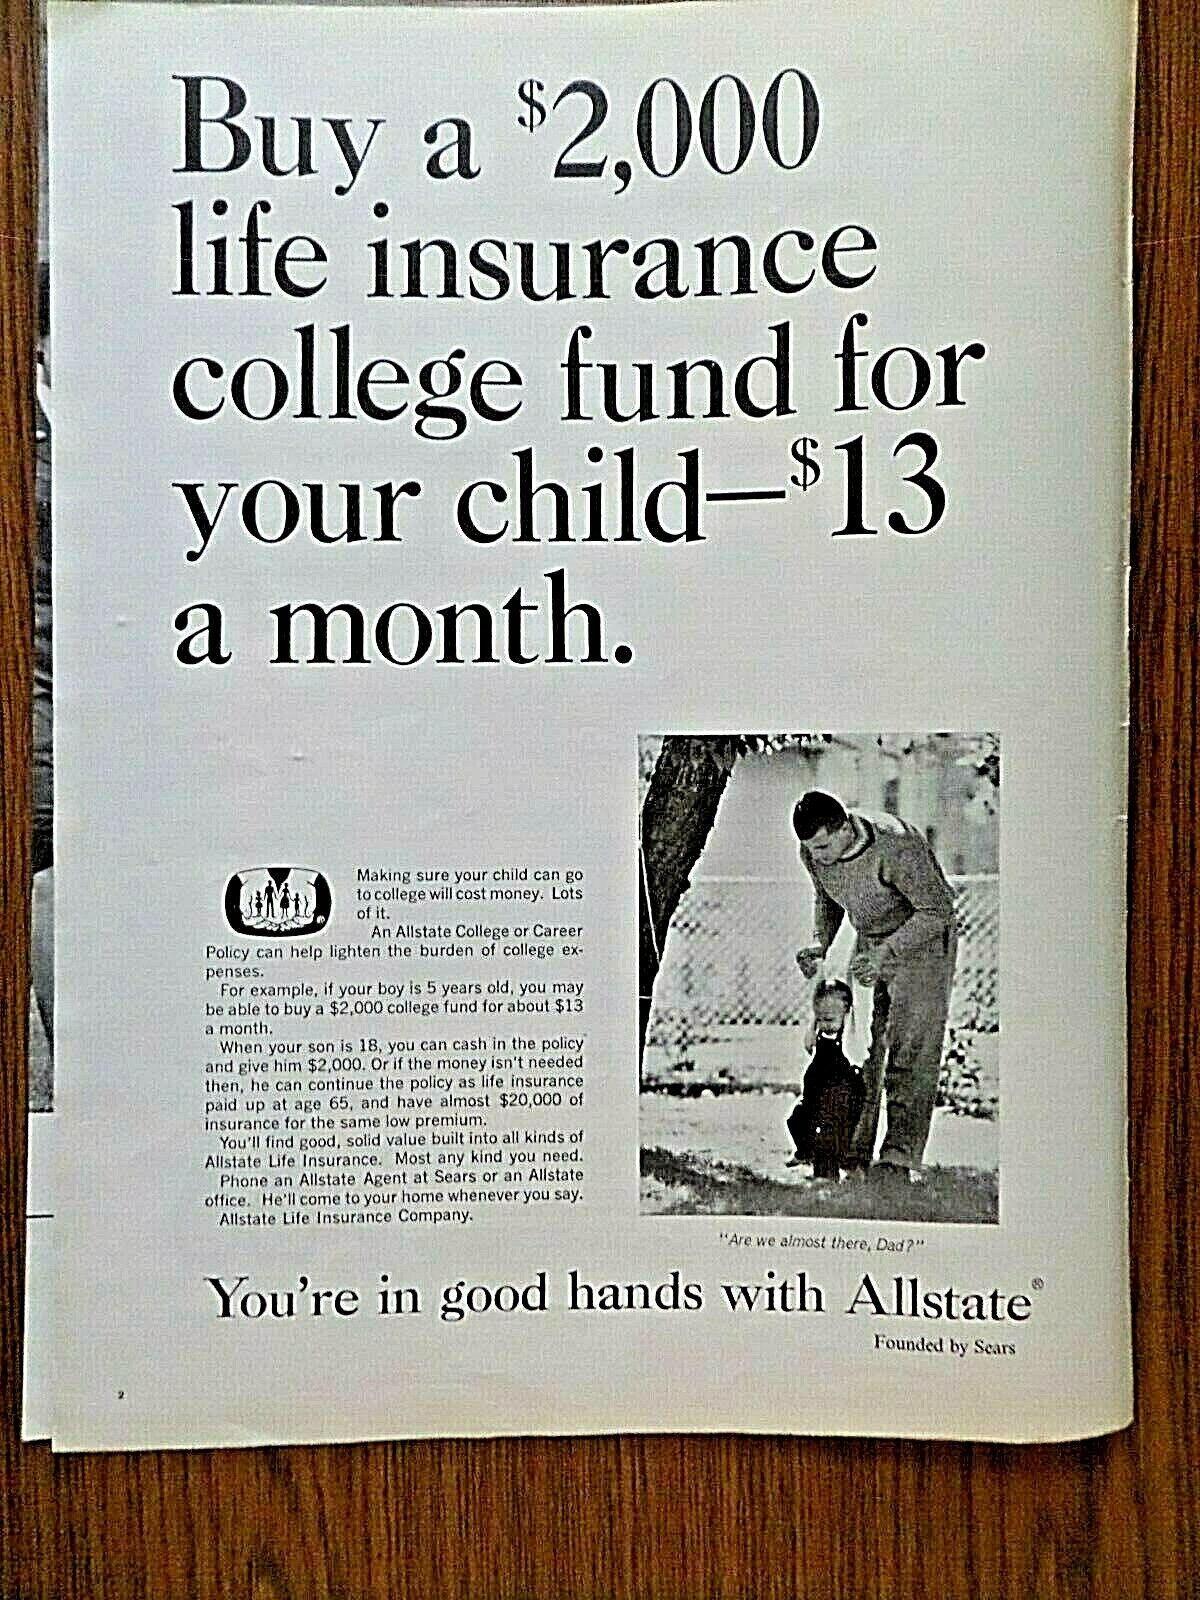 1965 Allstate Insurance Ad Buy a $2000 College Fund for Your Child $13 a Month